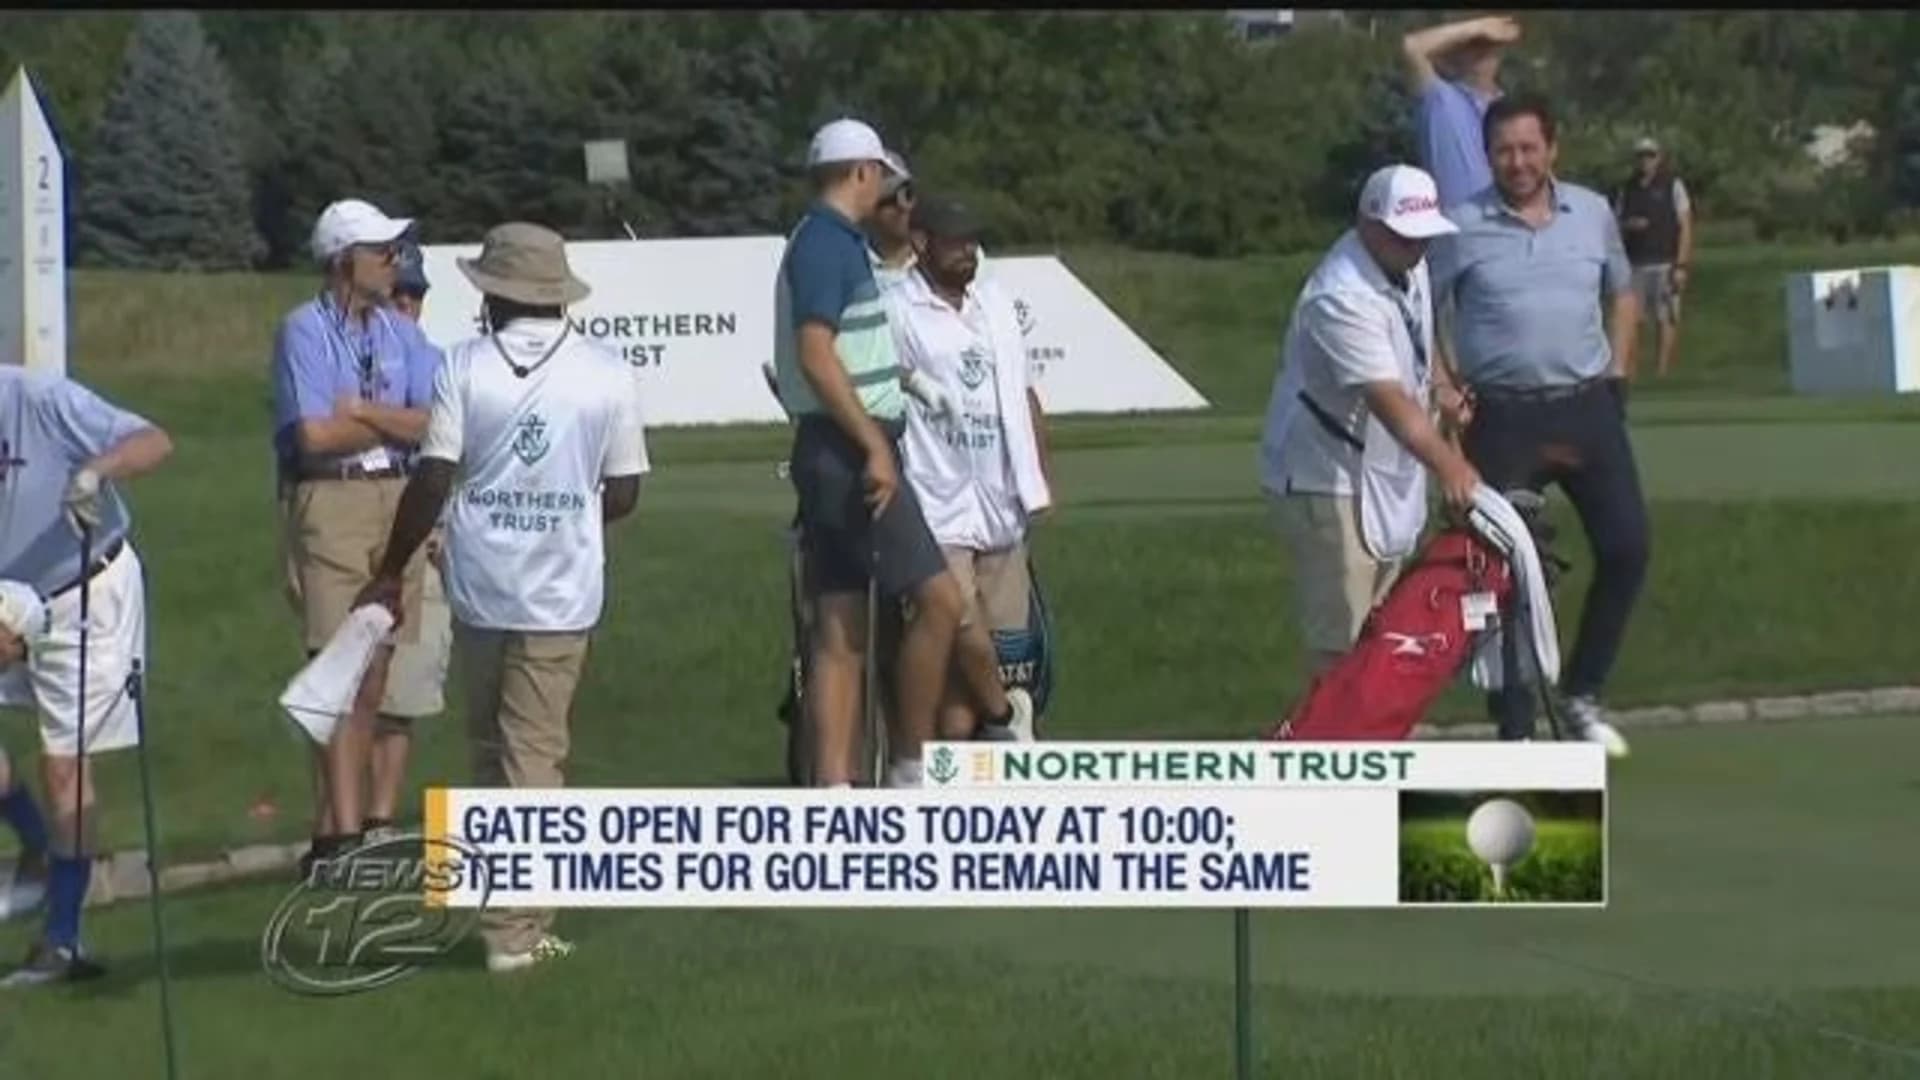 Storm damage delays gate opening for Northern Trust